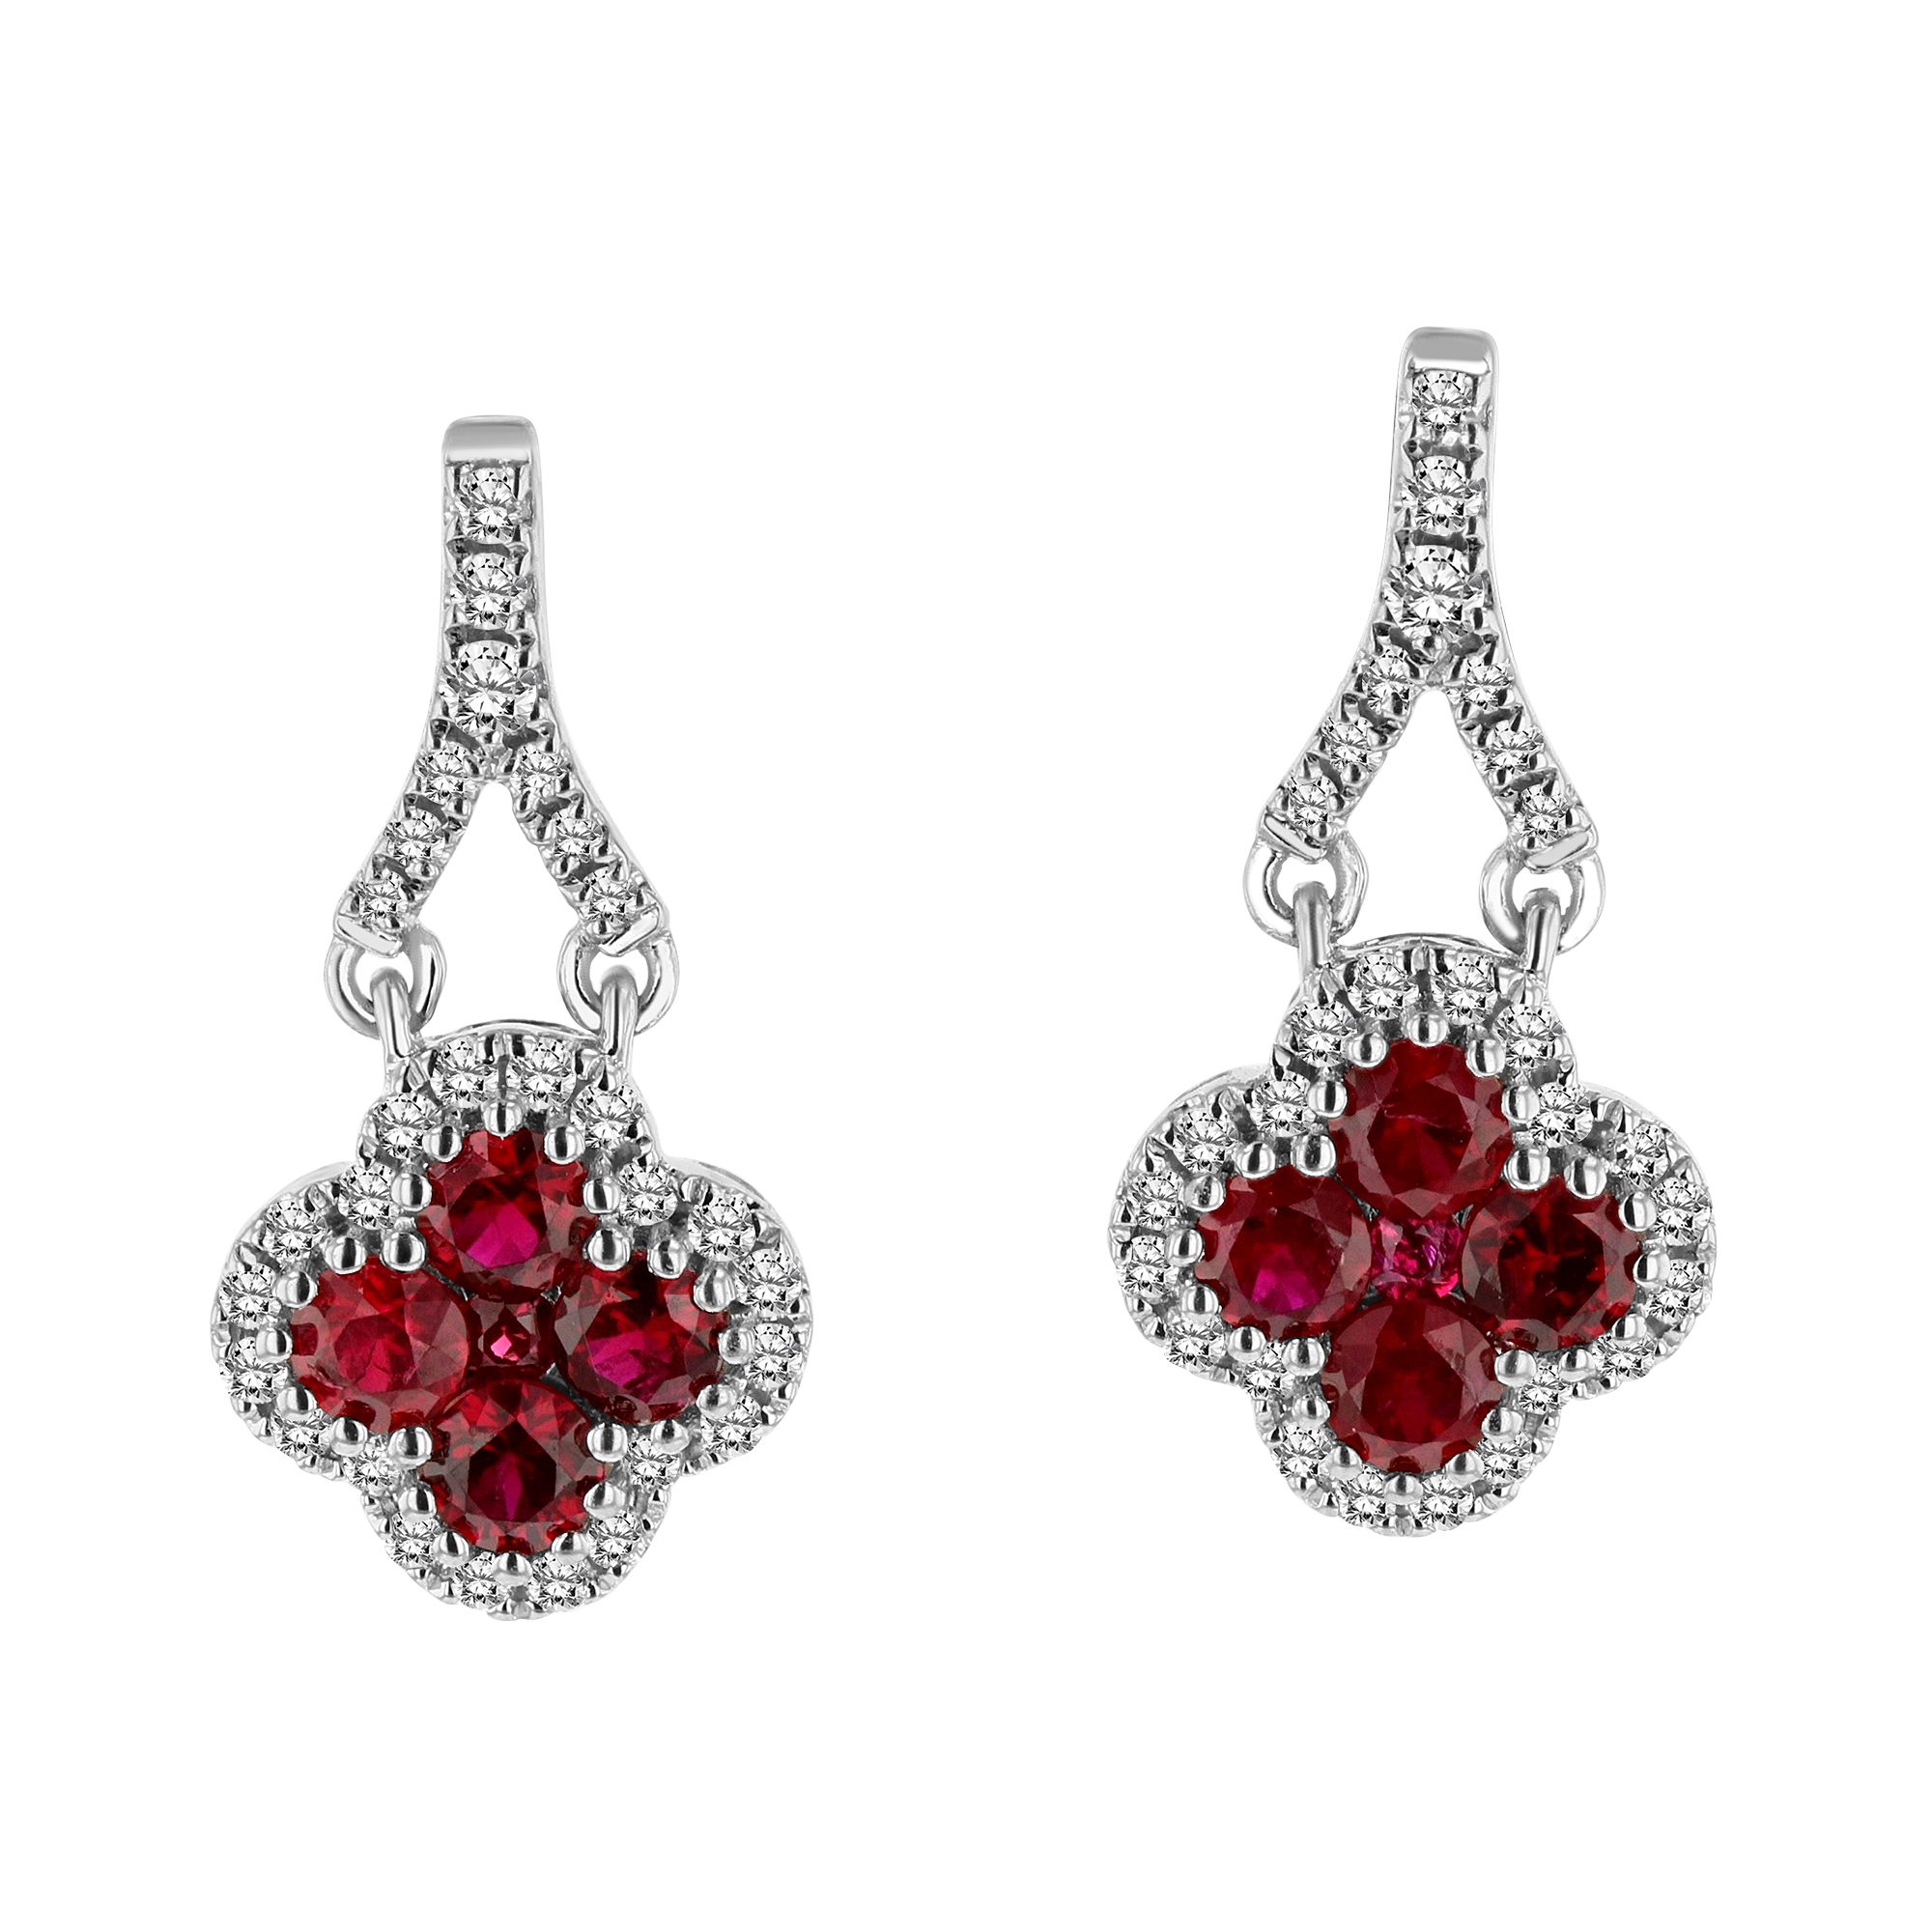 0.22ctw Diamond and Ruby Earrings in 18k White Gold